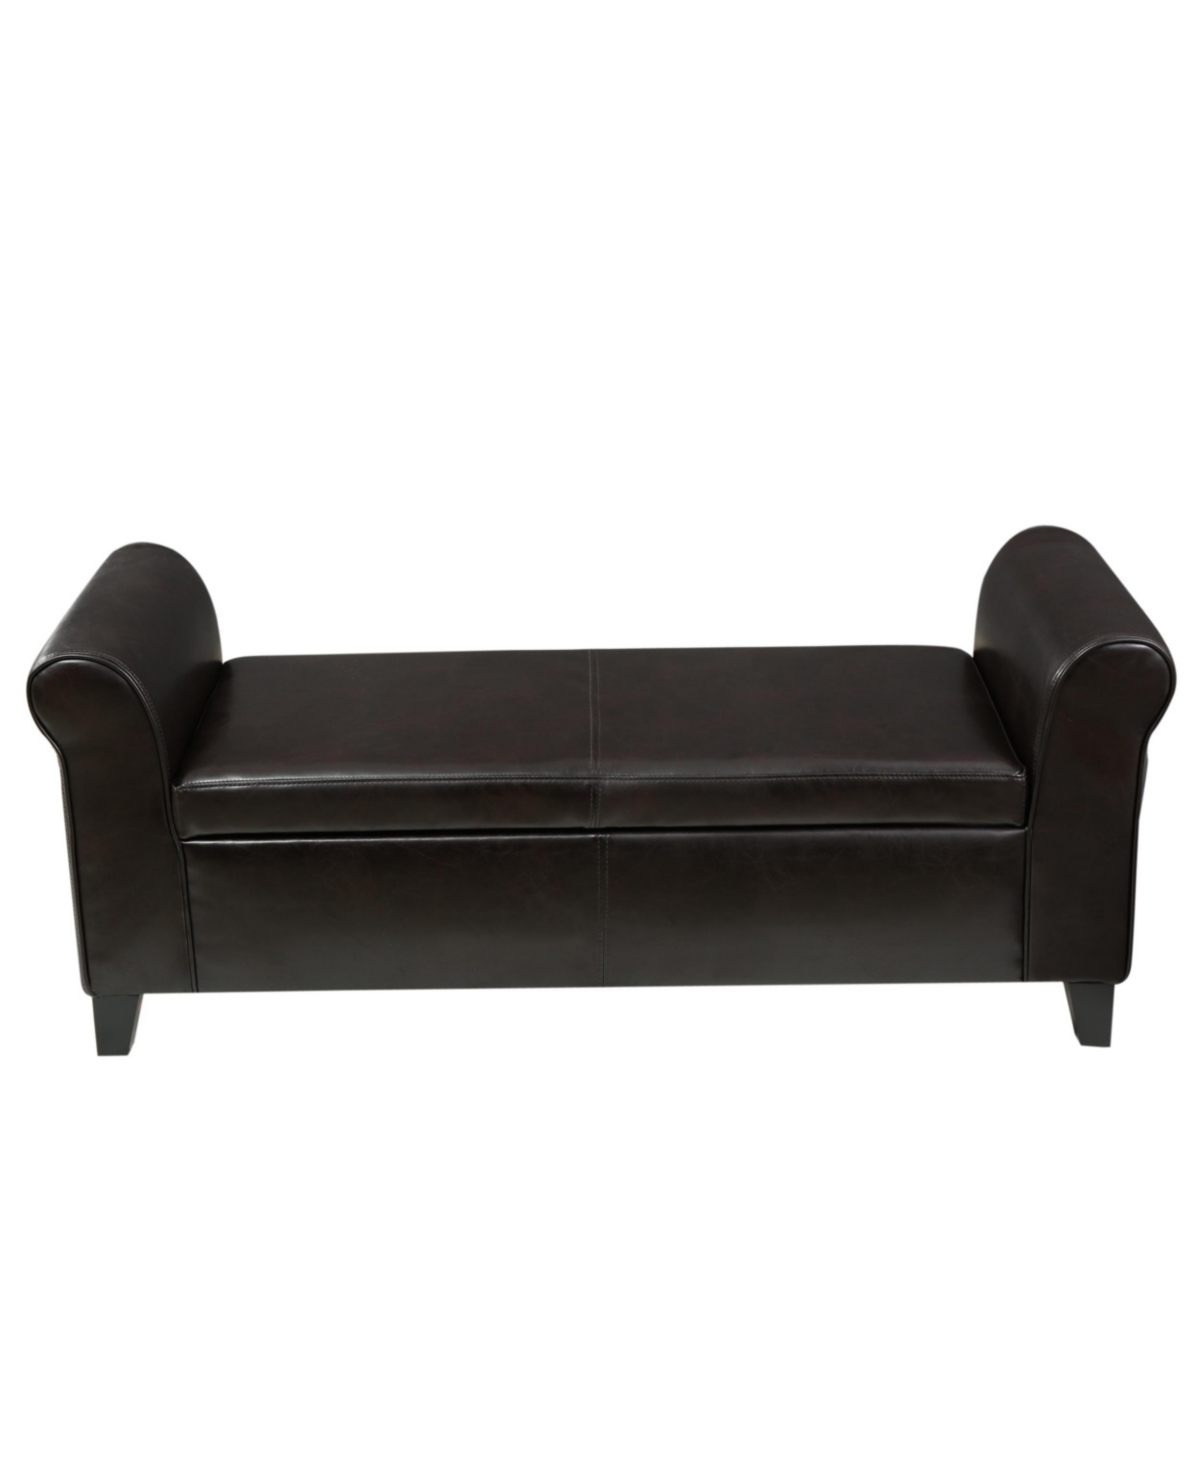 Noble House Hayes Contemporary Upholstered Storage Ottoman Bench With Rolled Arms In Dark Brown